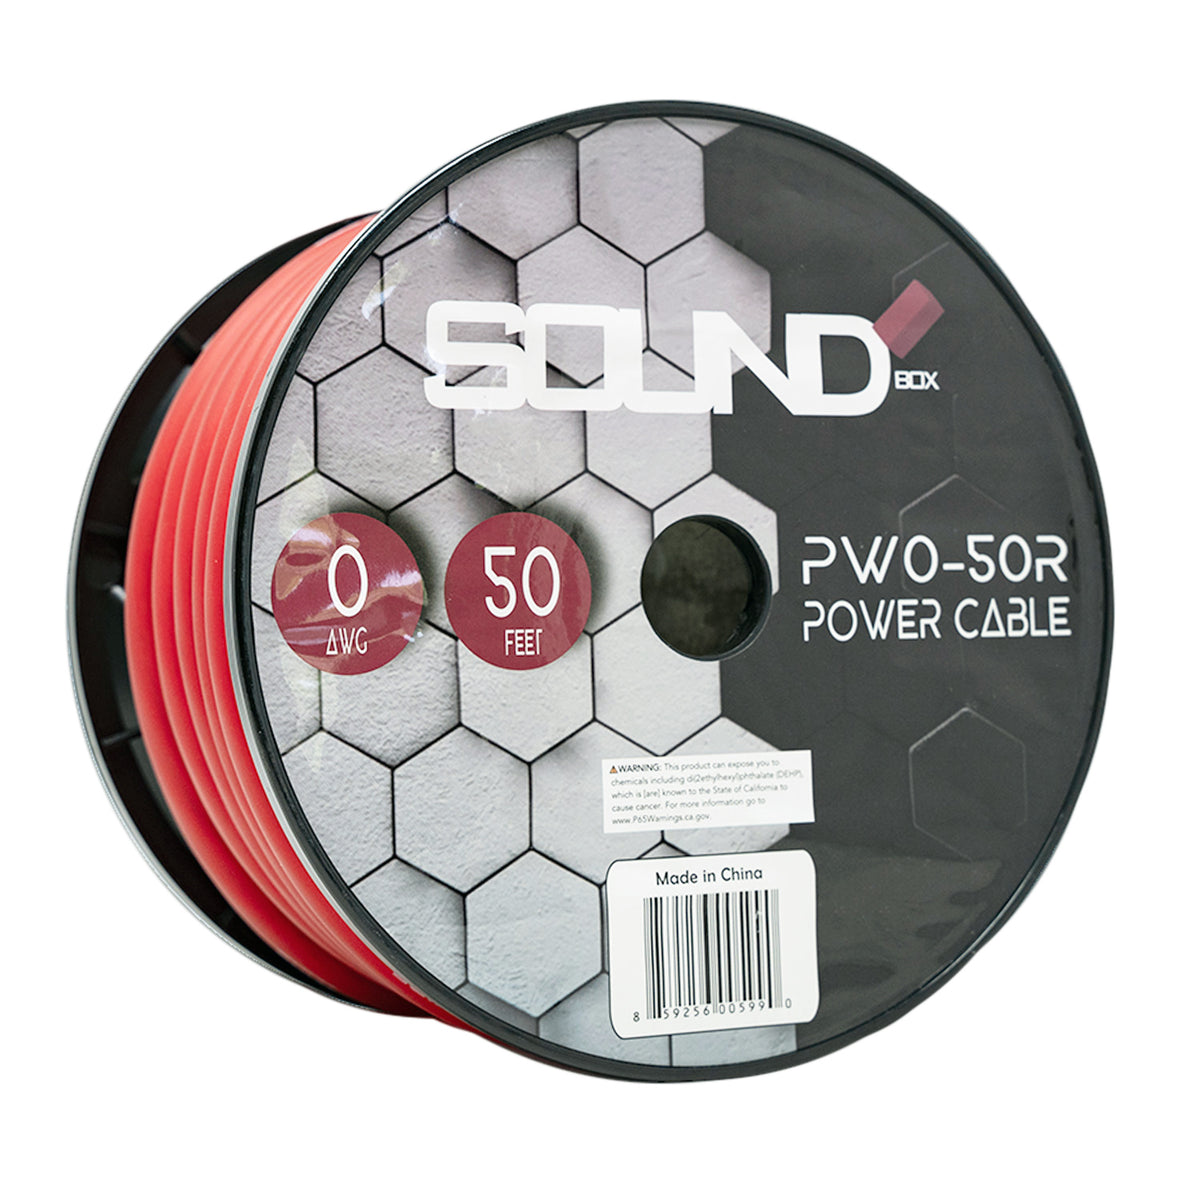 SoundBox PW0-50R, 1/0 Gauge OFC Copper Amplifier Power / Ground Wire - 50 Ft. Spool - Red